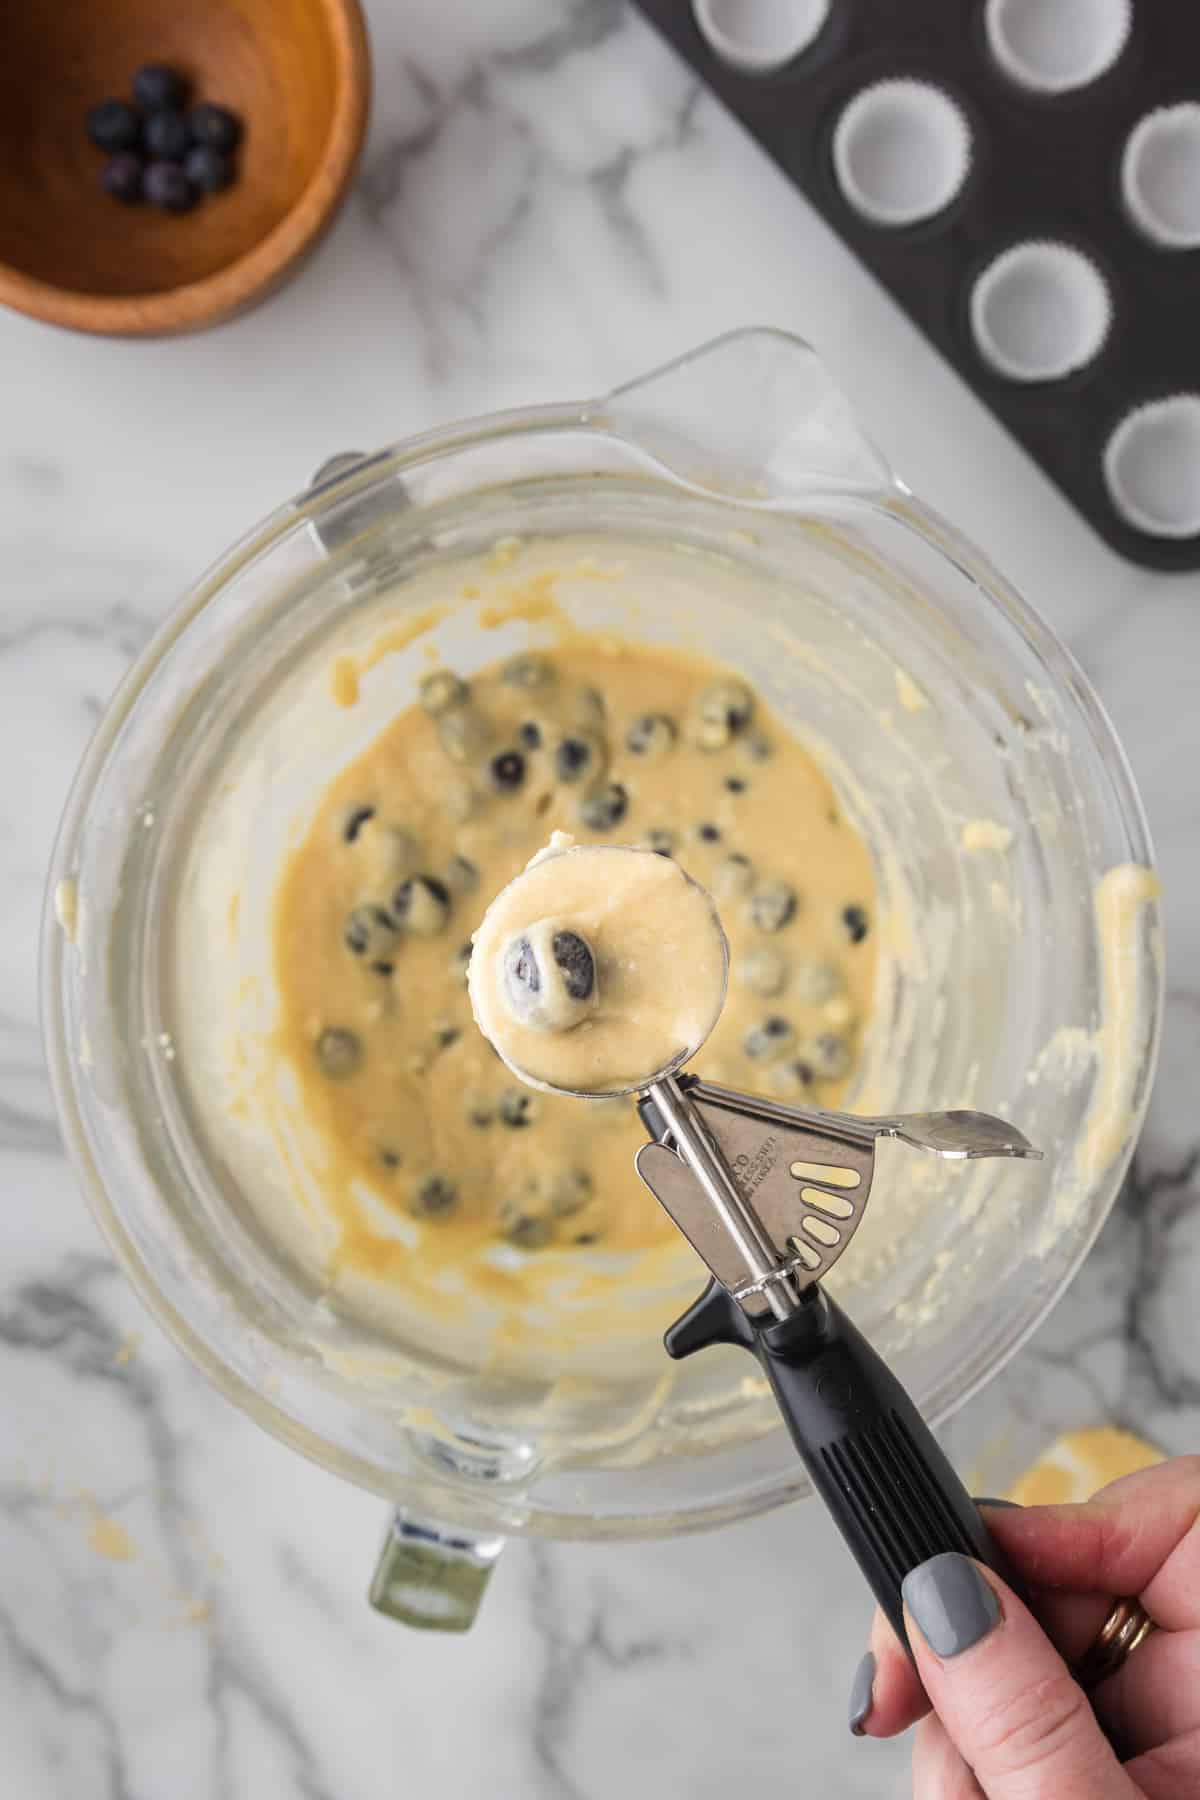 A person mixing blueberry muffin batter in a bowl.